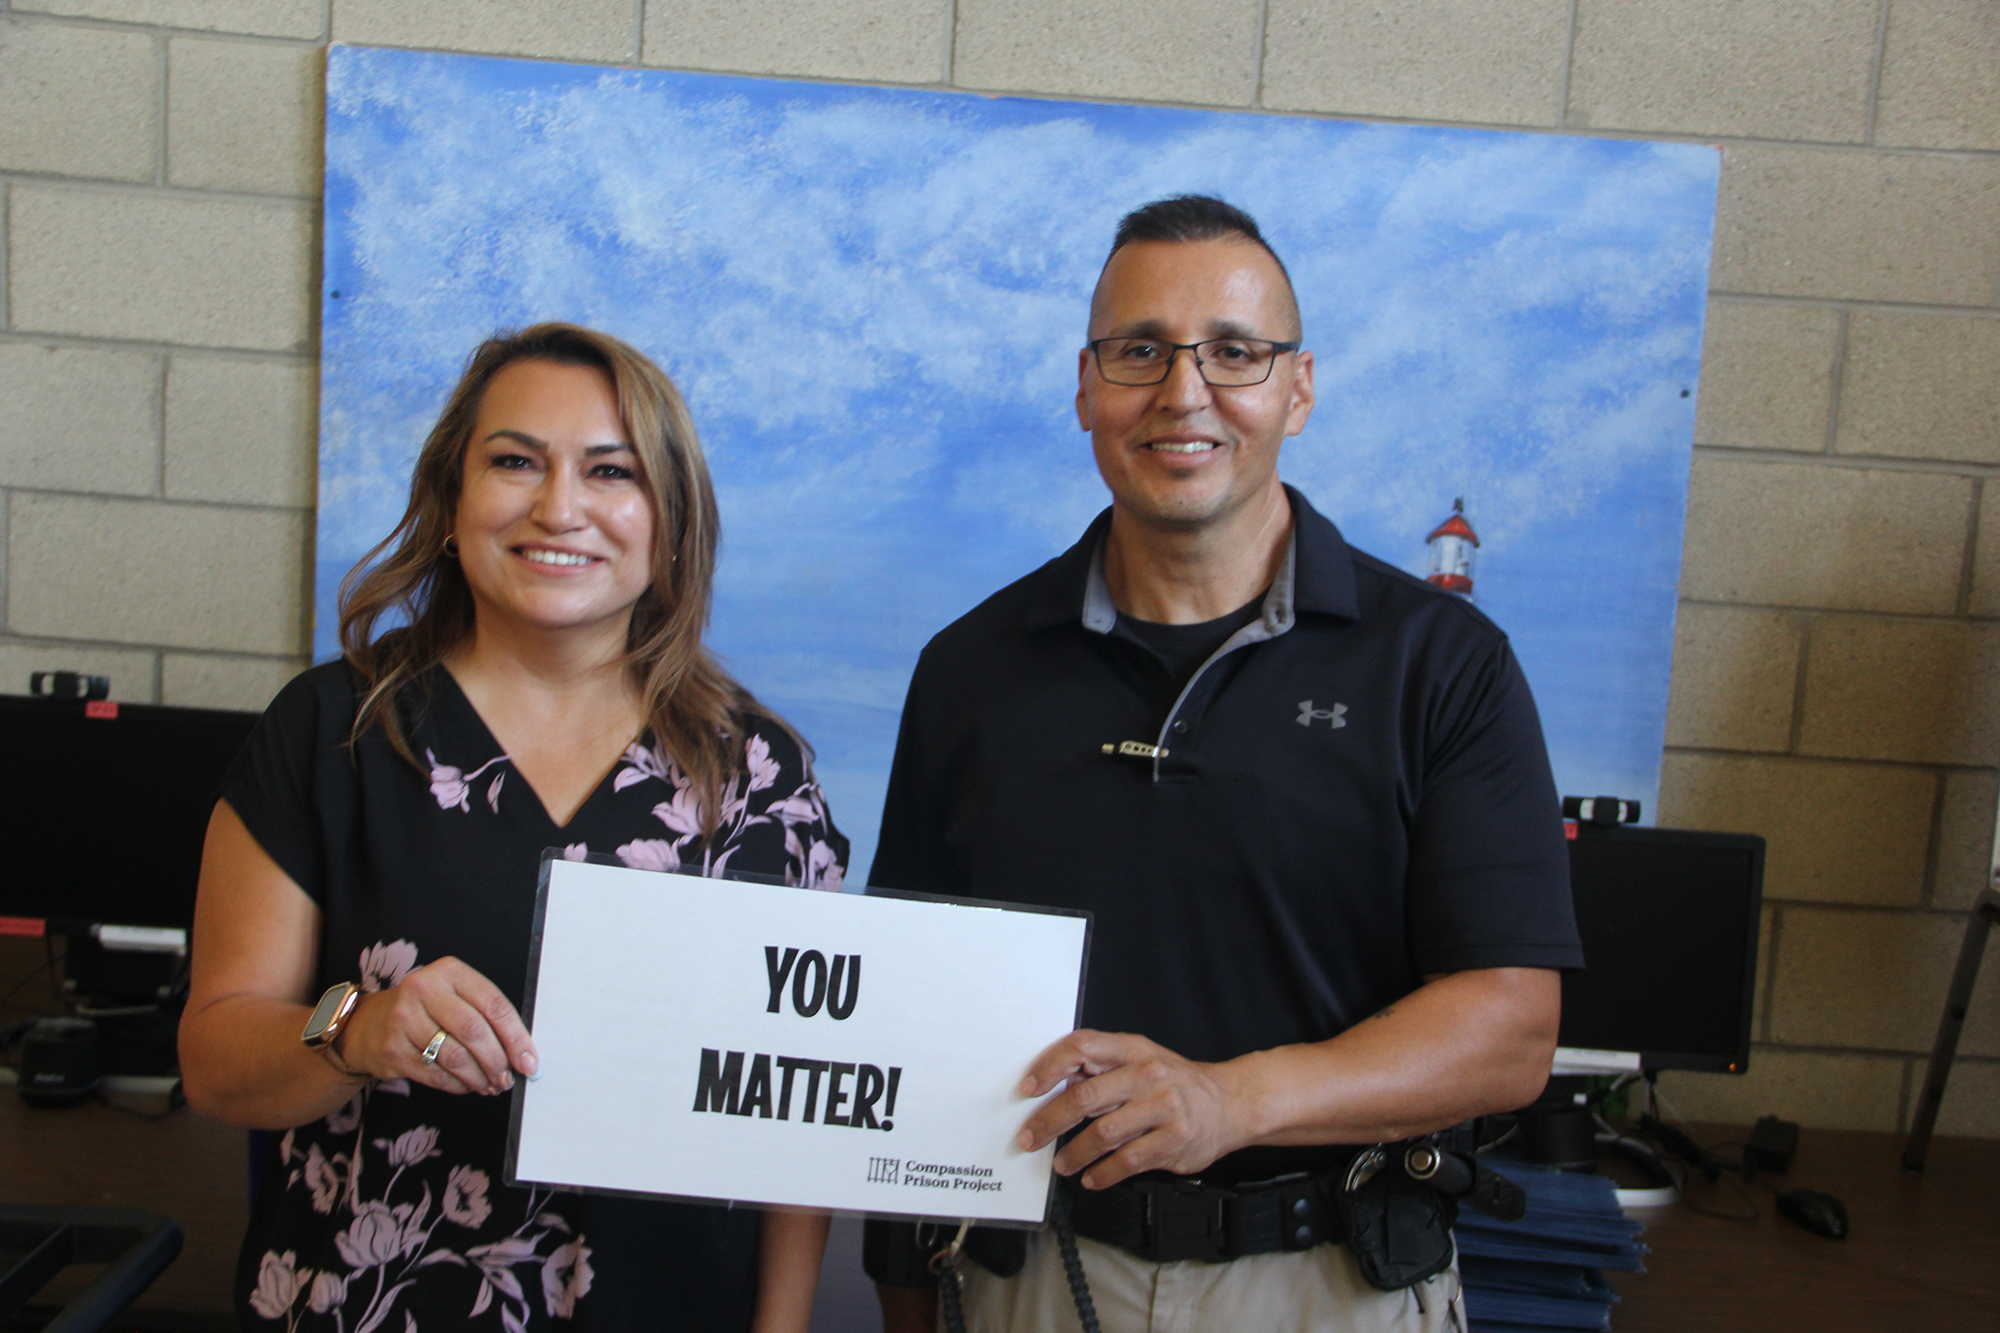 Man and woman holding a "you matter" sign